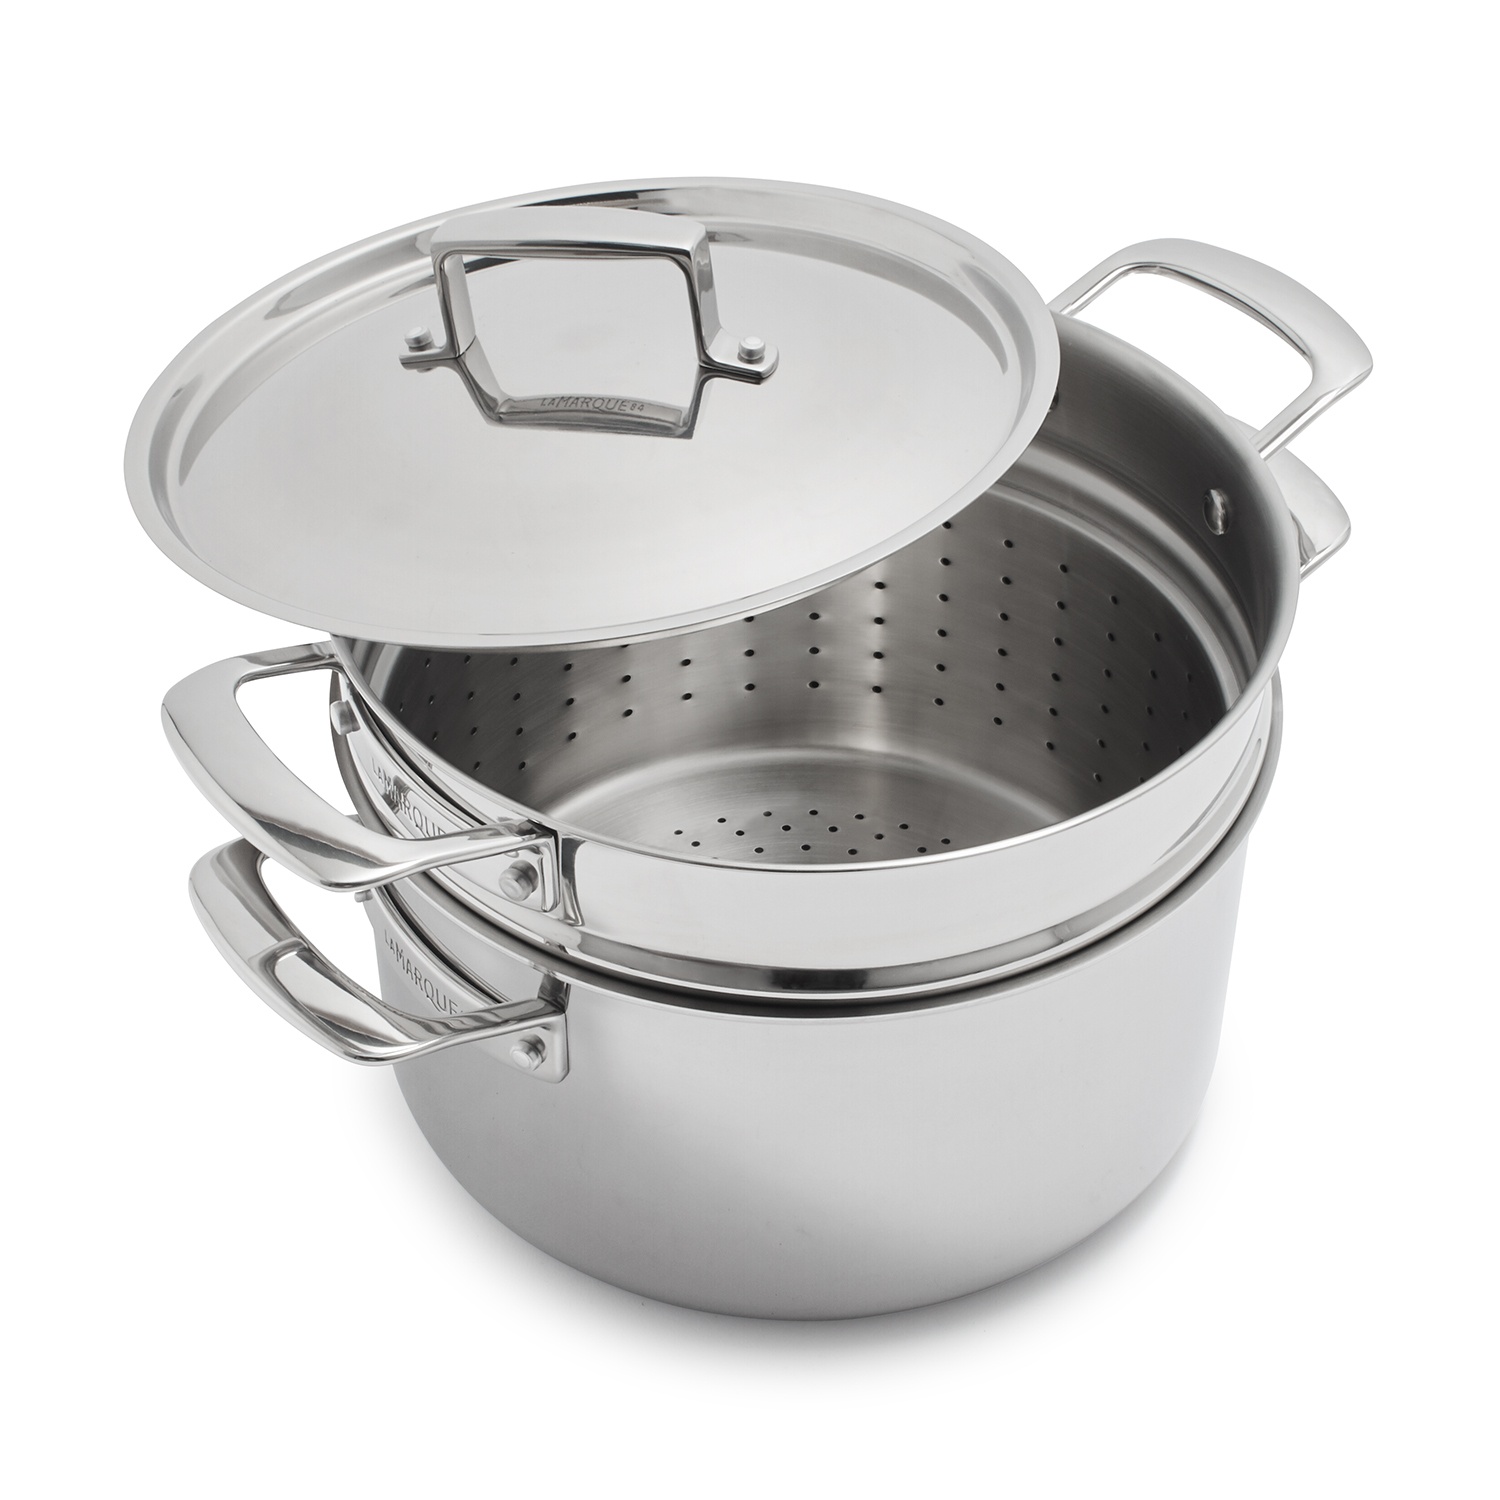 slide 1 of 1, La Marque 84 Stainless Steel Stockpot with Pasta Insert, 8 qt